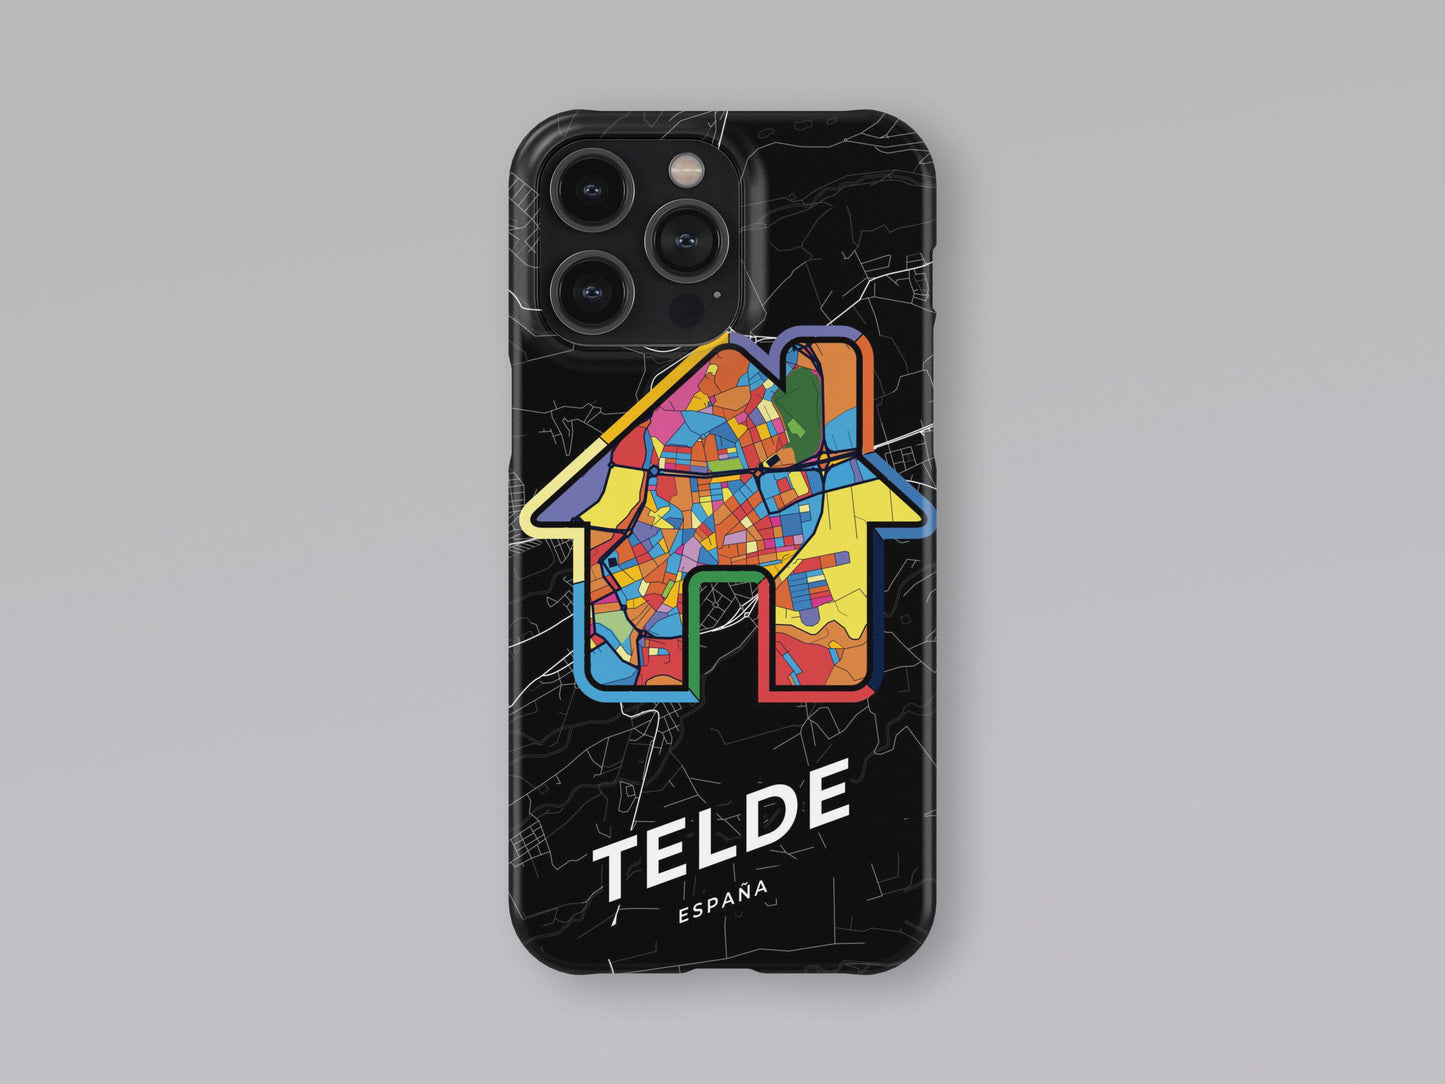 Telde Spain slim phone case with colorful icon 3